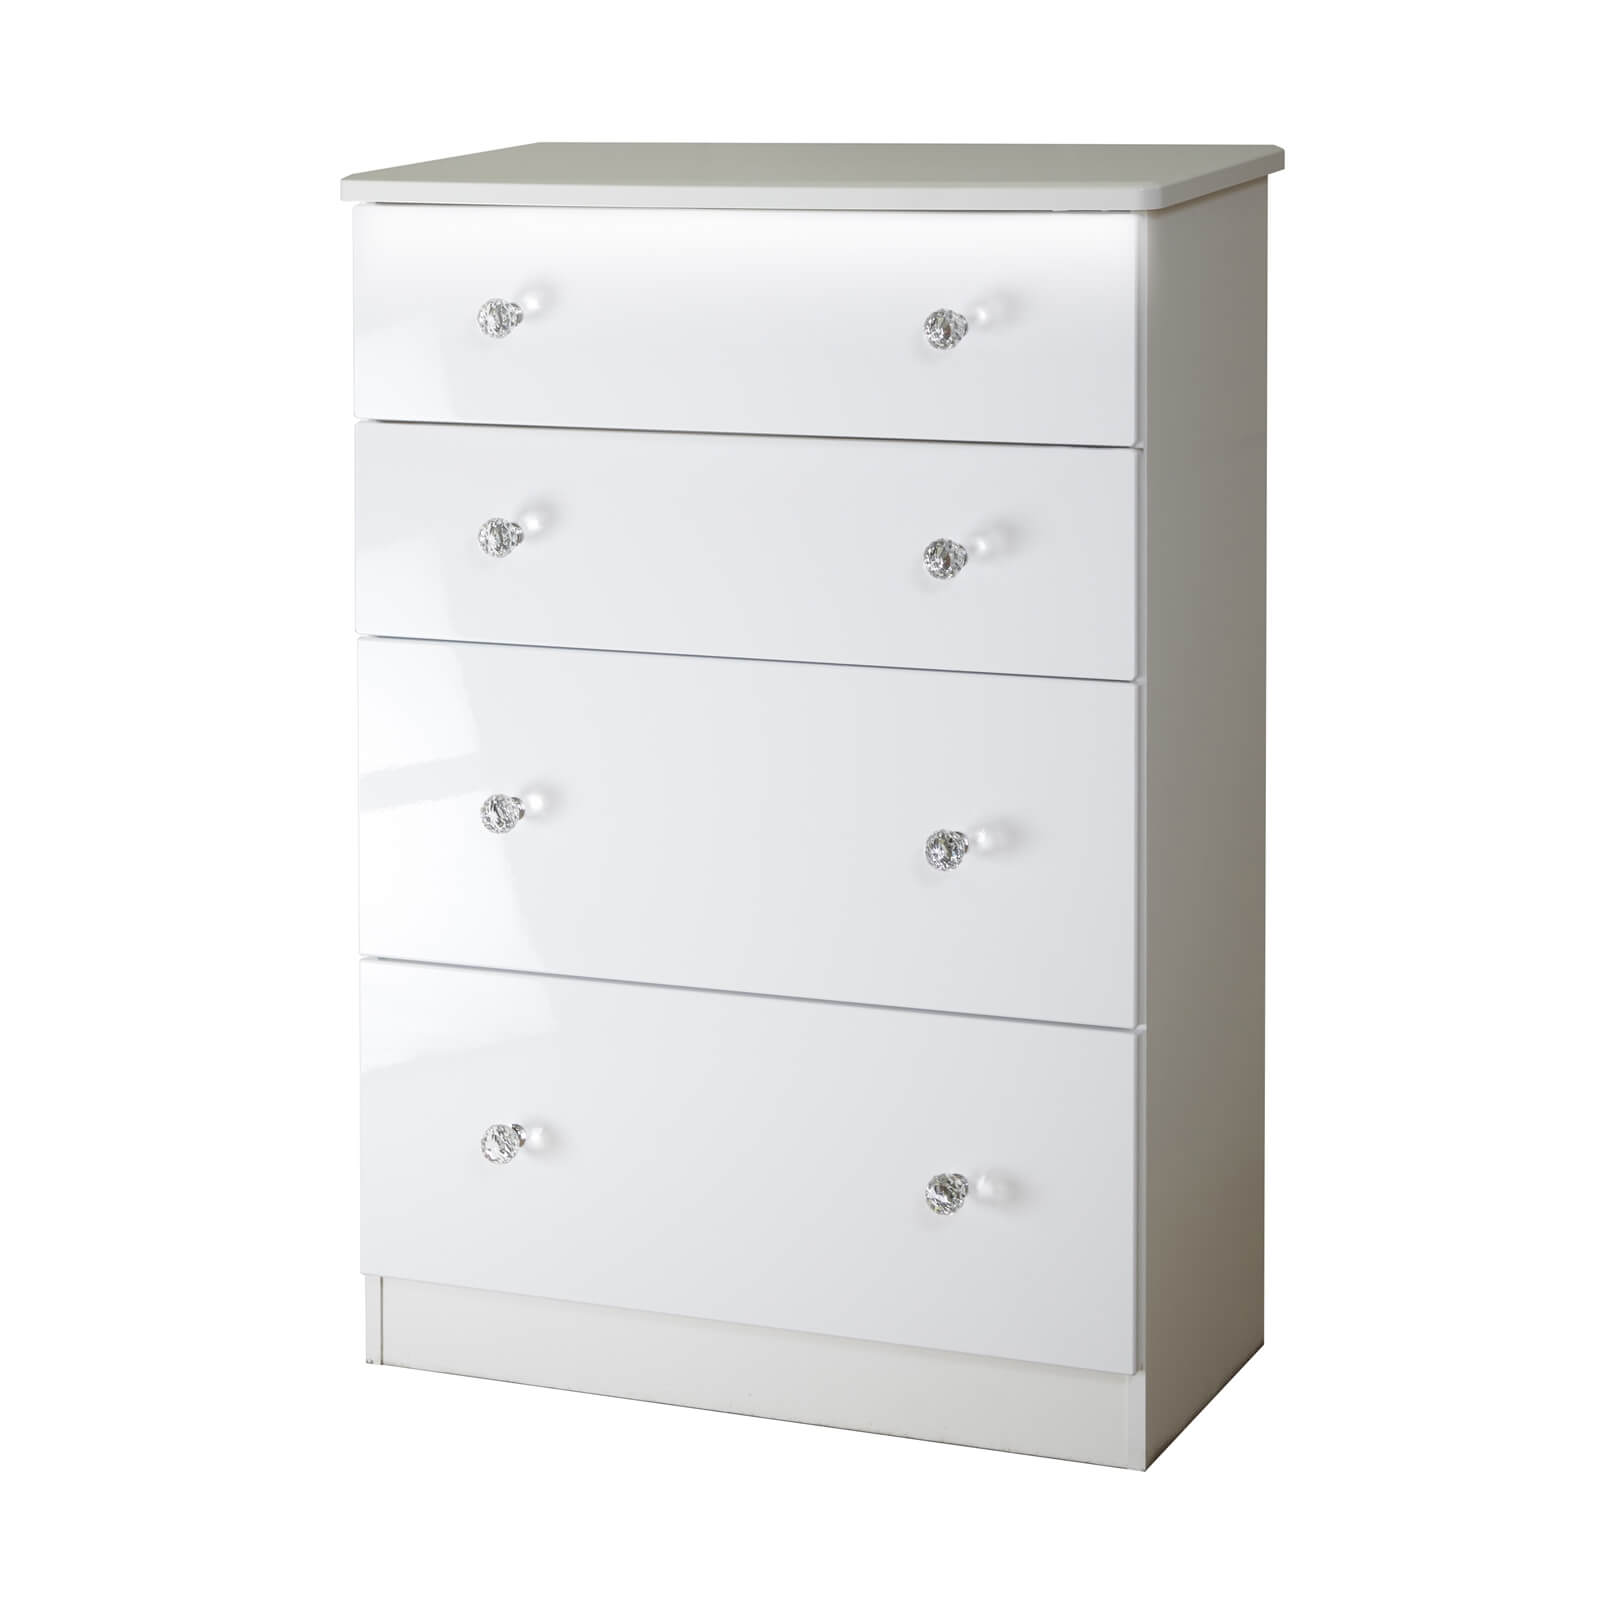 Lumo 4 Drawer Deep Chest with LED Lighting - White